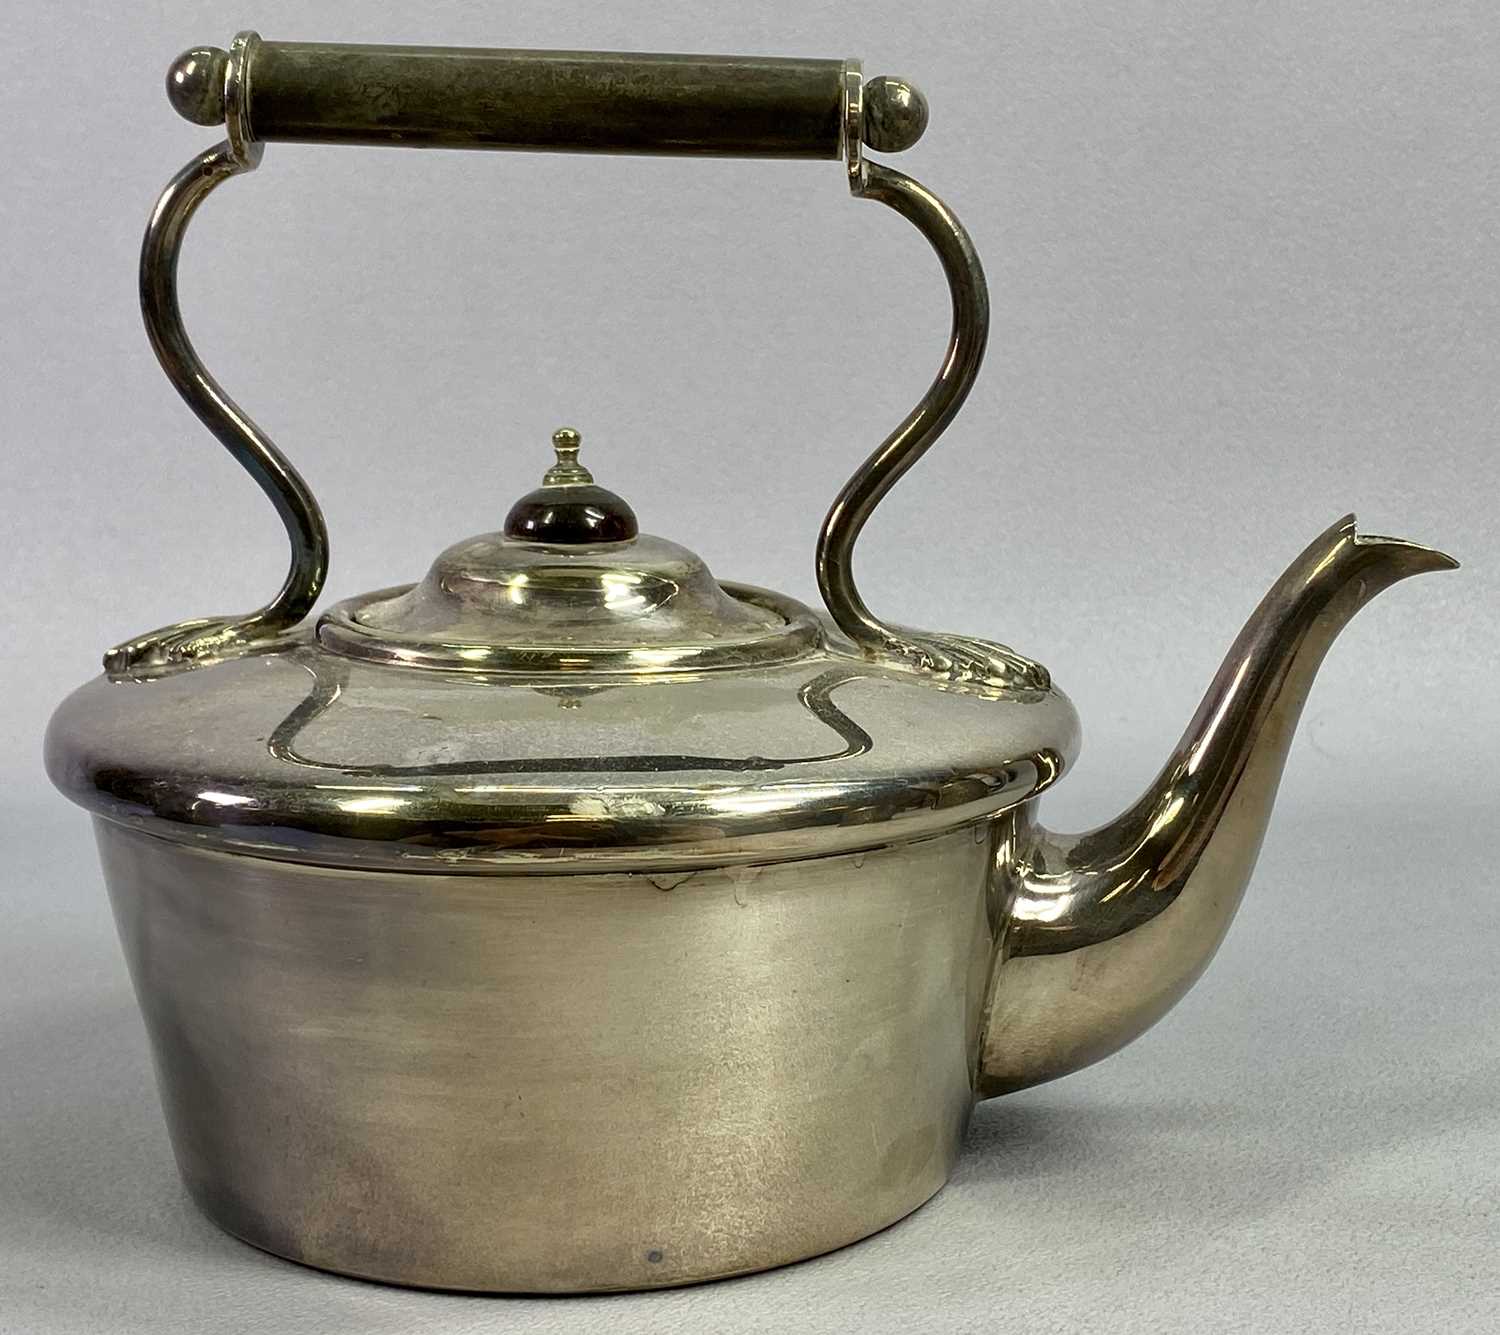 BURMESE STYLE WHITE METAL TEAPOT - repousse chased design with animals hunting, scrolls and flowers, - Image 4 of 5